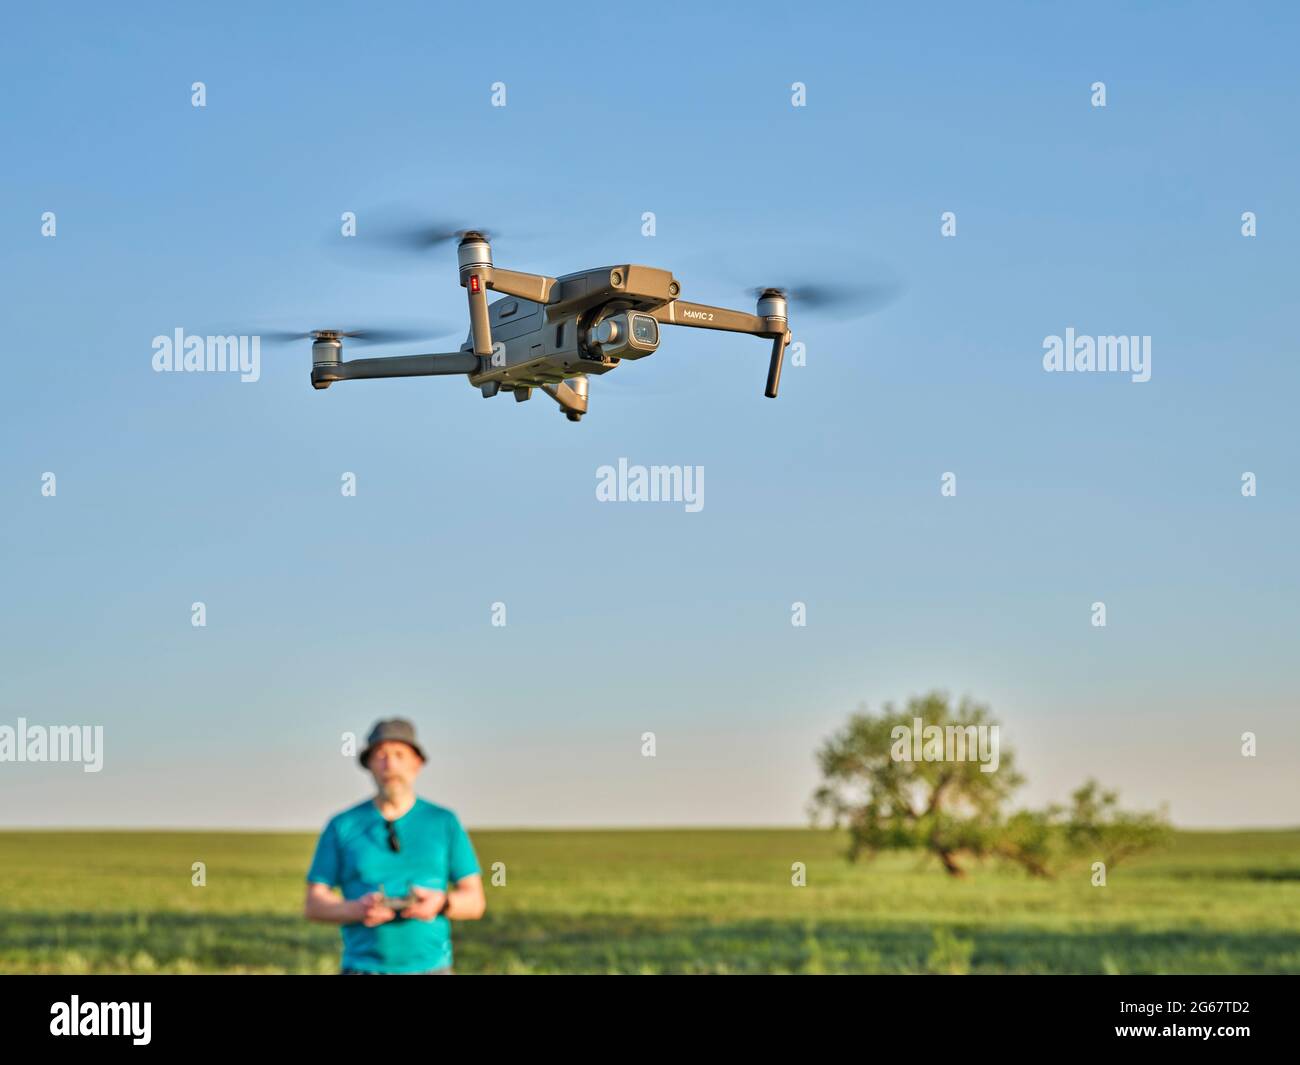 Briggsdale, CO, USA - June 8, 2021:  Radio controlled DJI Mavic 2 Pro quadcopter drone is flying over green prairie with a male pilot in background. Stock Photo